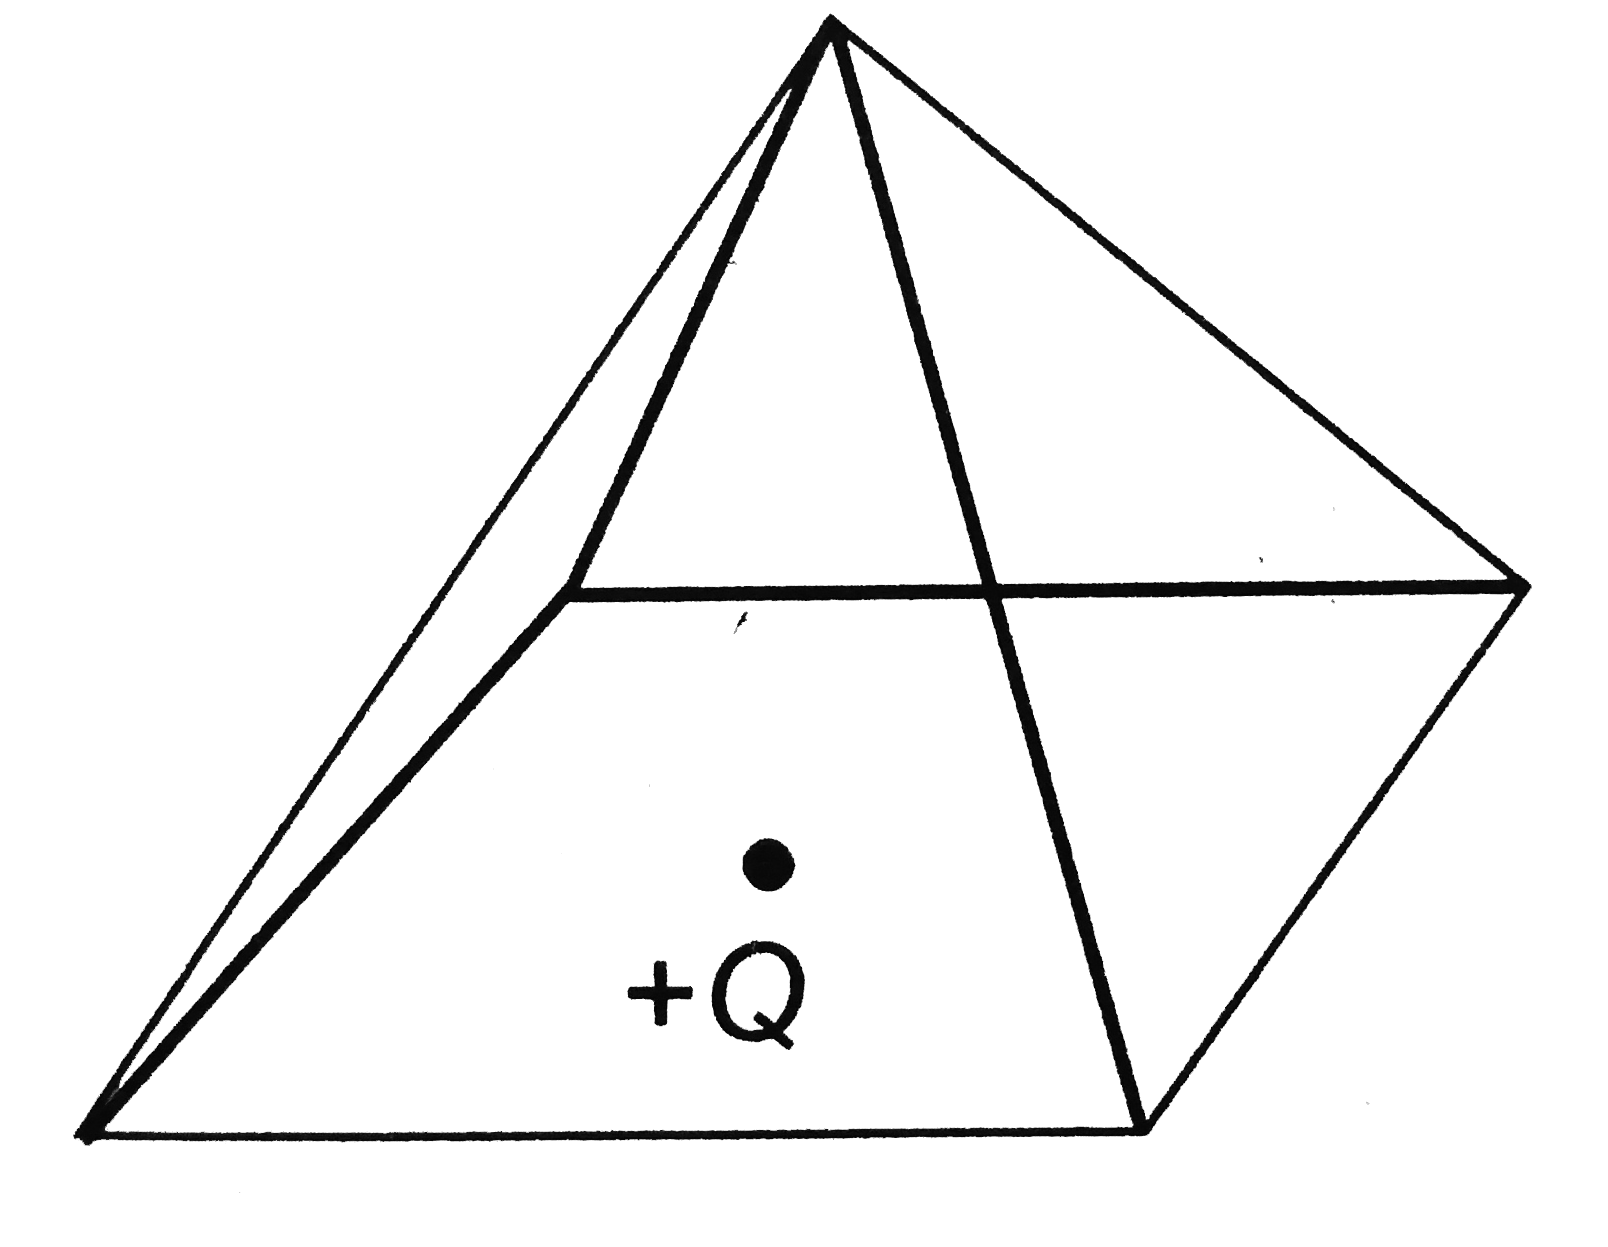 A point charge +Q is positioned at the centre of the base of a square pyramid as shown. The flux through one of the four identical upper faces of the pyramid is